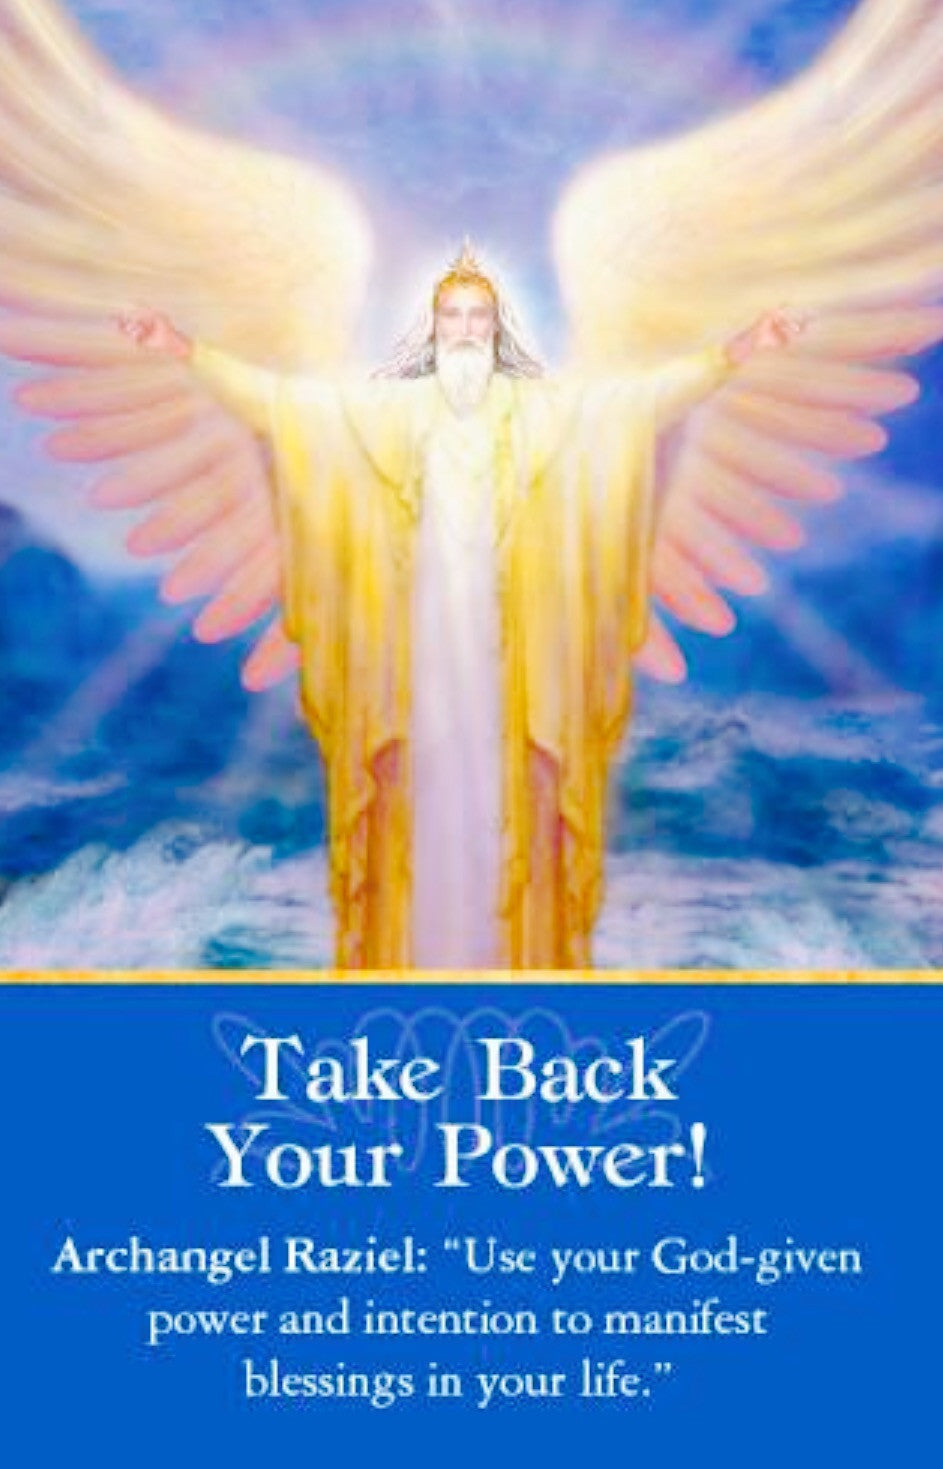 Archangel Raziel: “Use your God-given power and intention to manifest blessings in your life.”